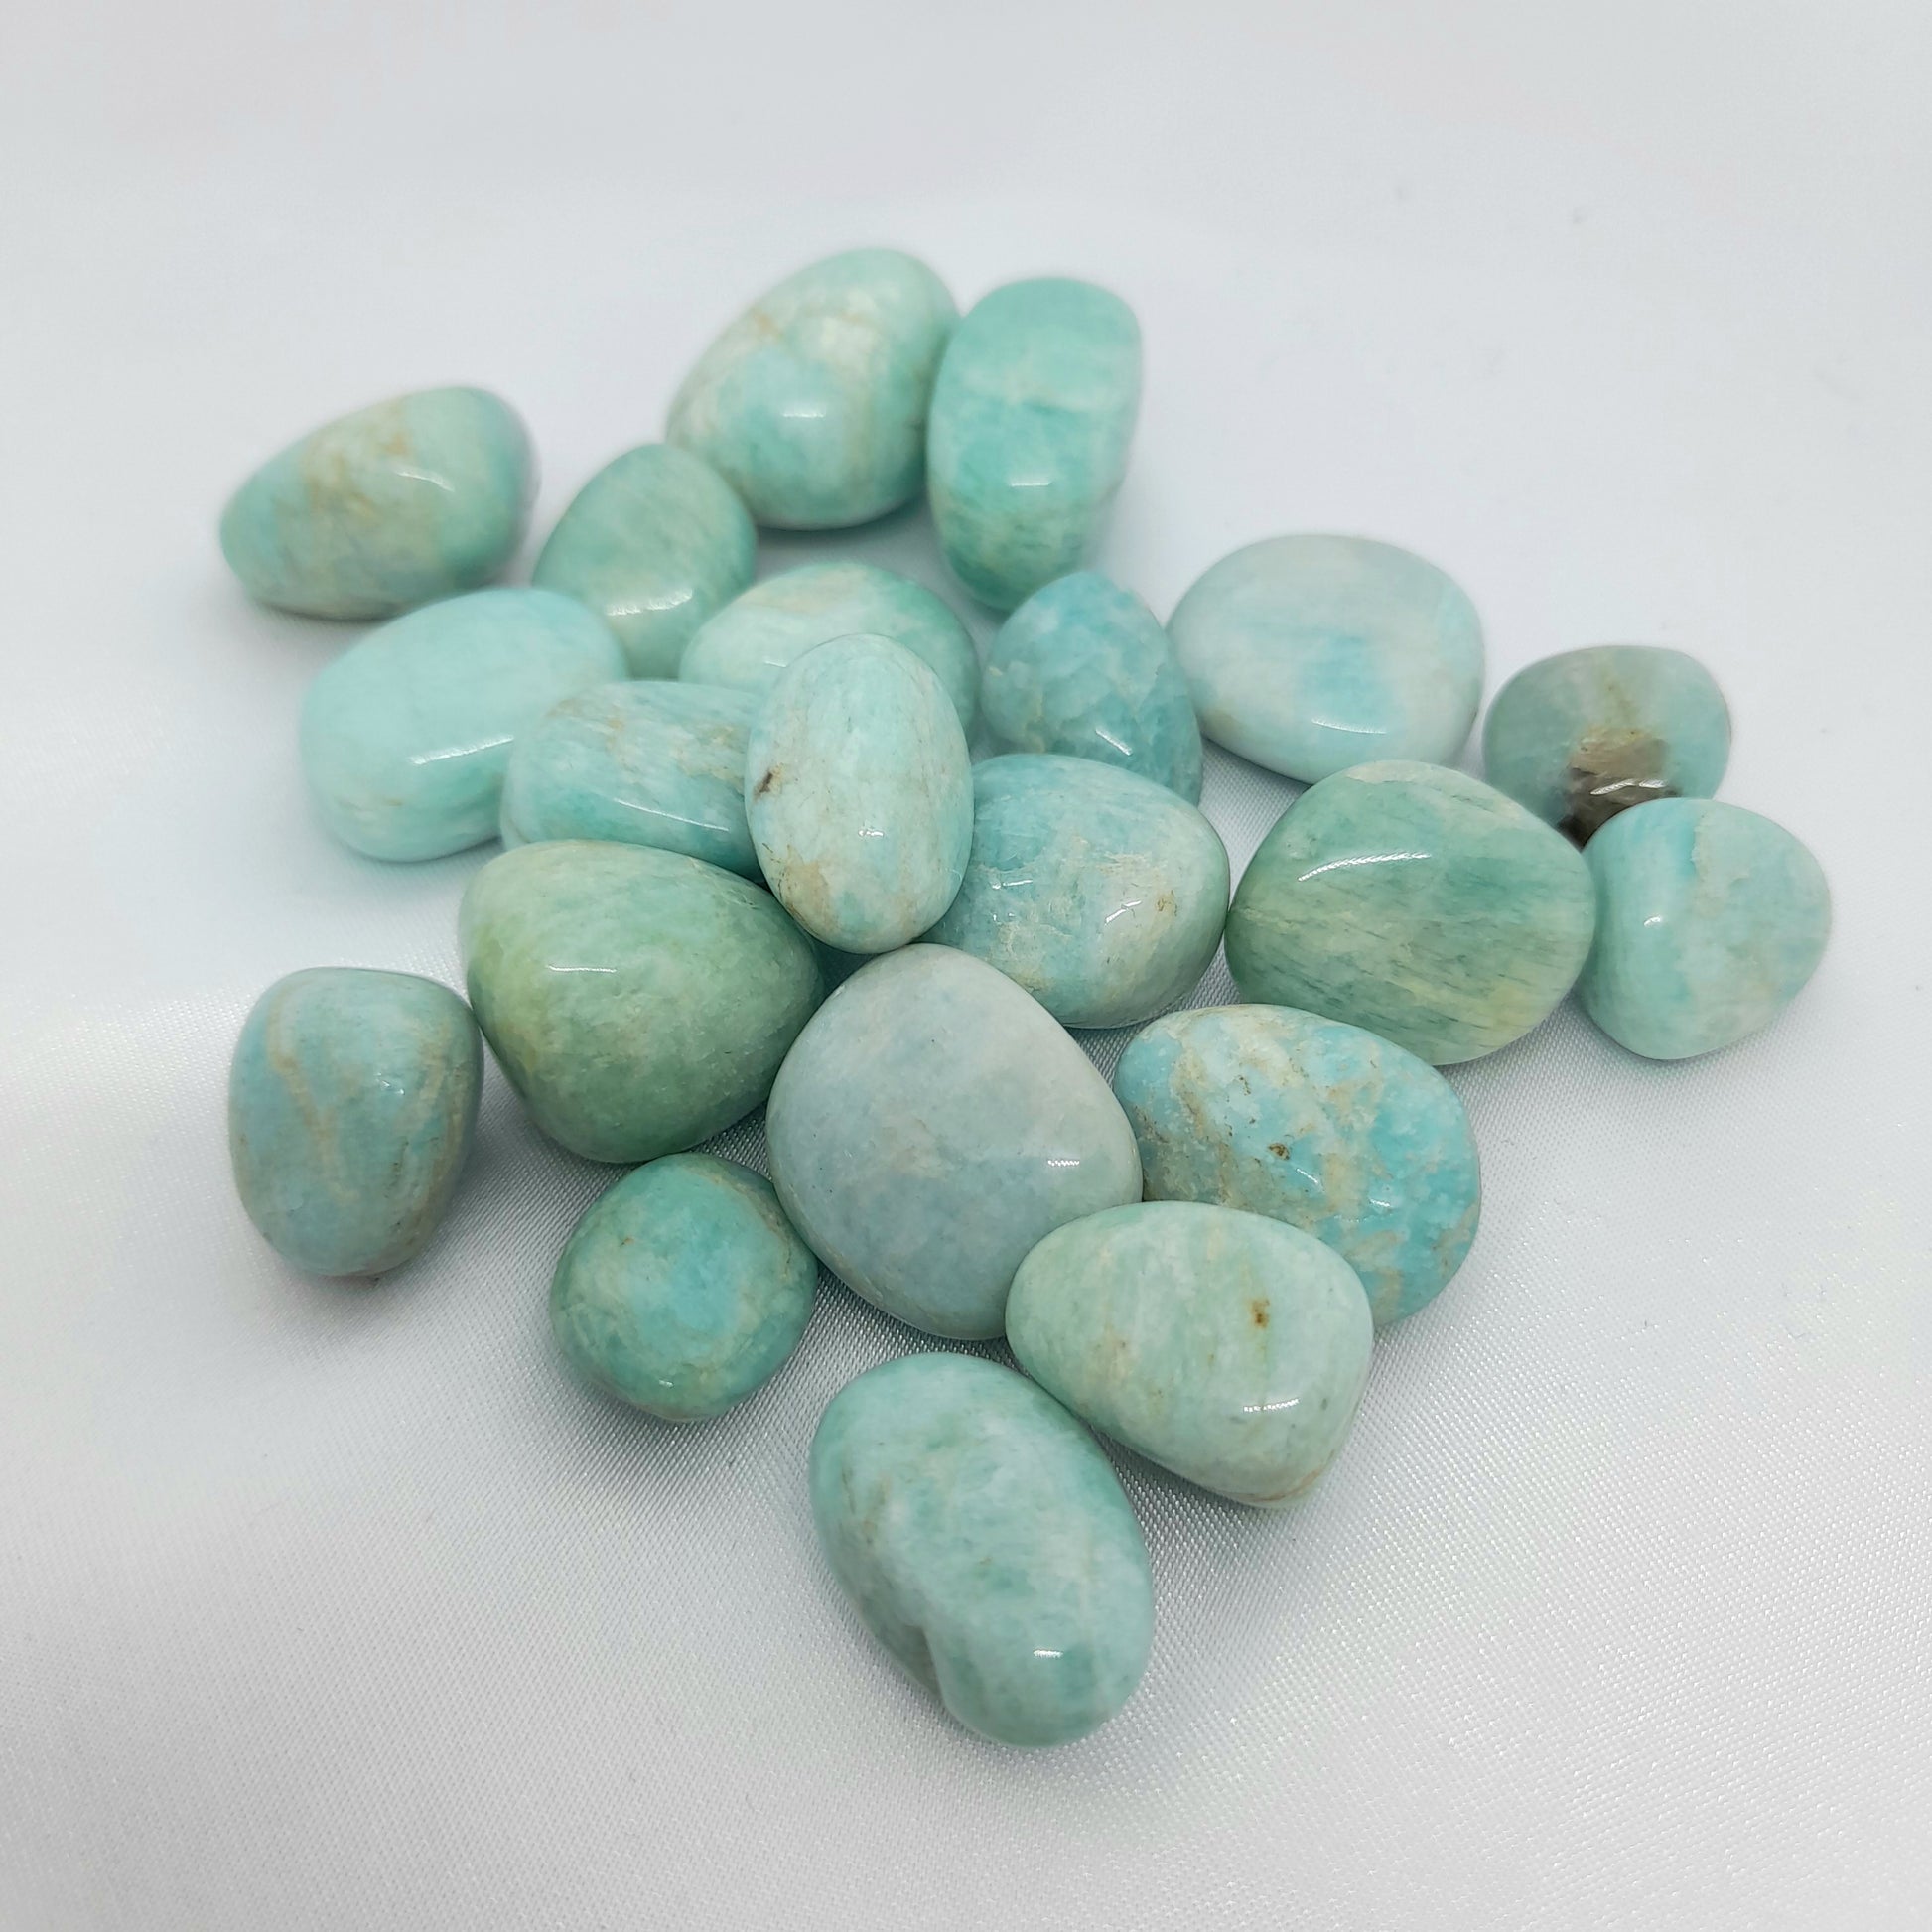 Amazonite Tumbled Stone - Blue crystal for fear release and tranquility. Unique markings. Limited stock. Enhance well-being today